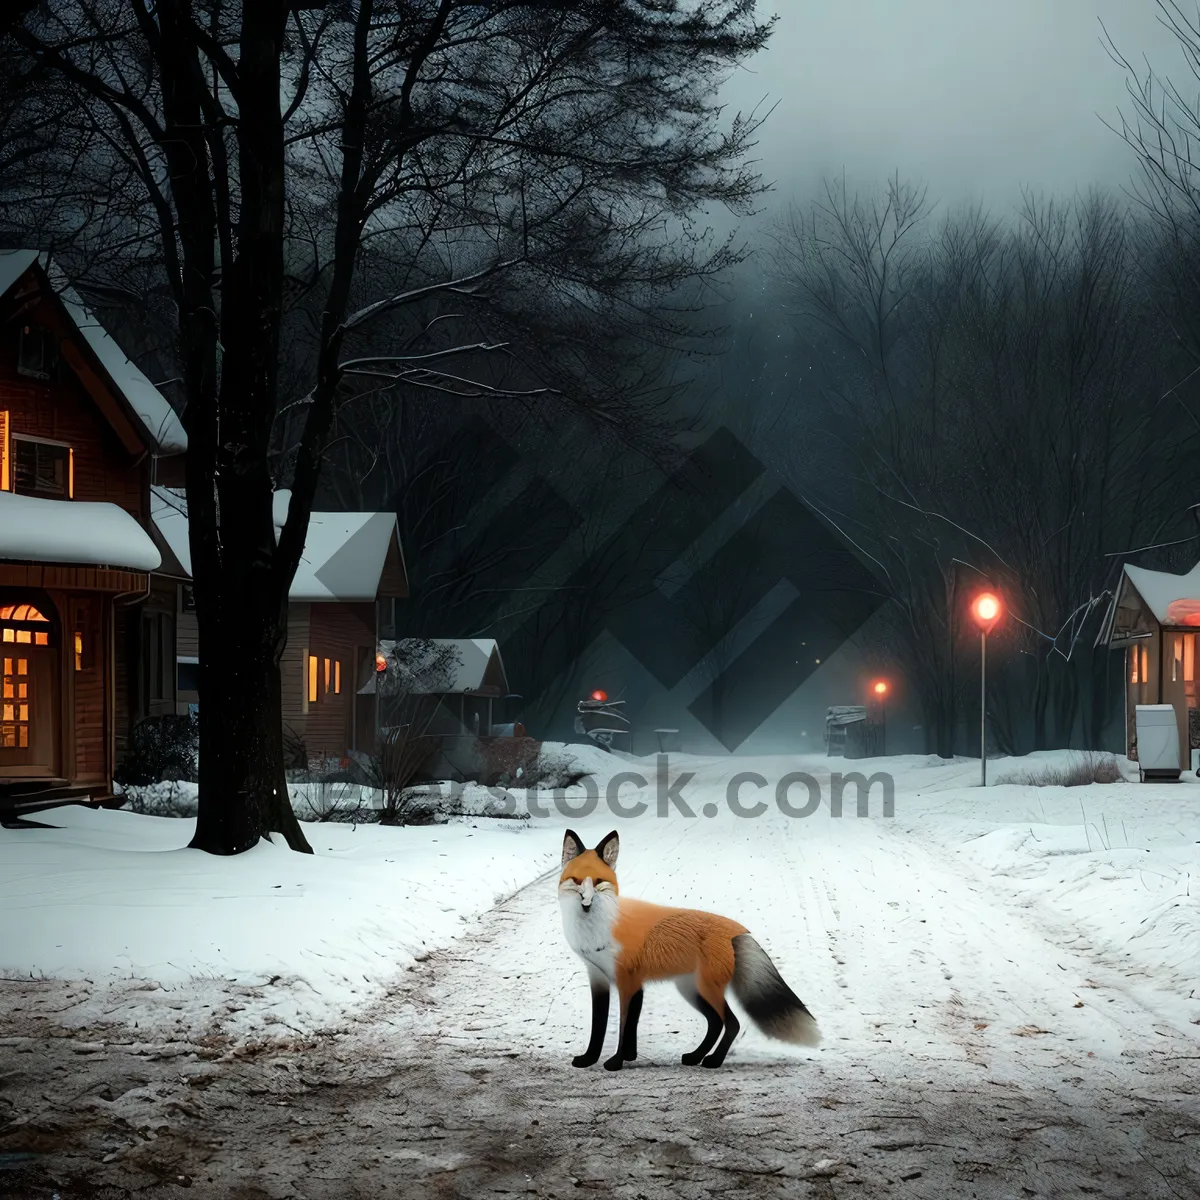 Picture of Winter Wonderland: Majestic Red Fox in Snowy Forest